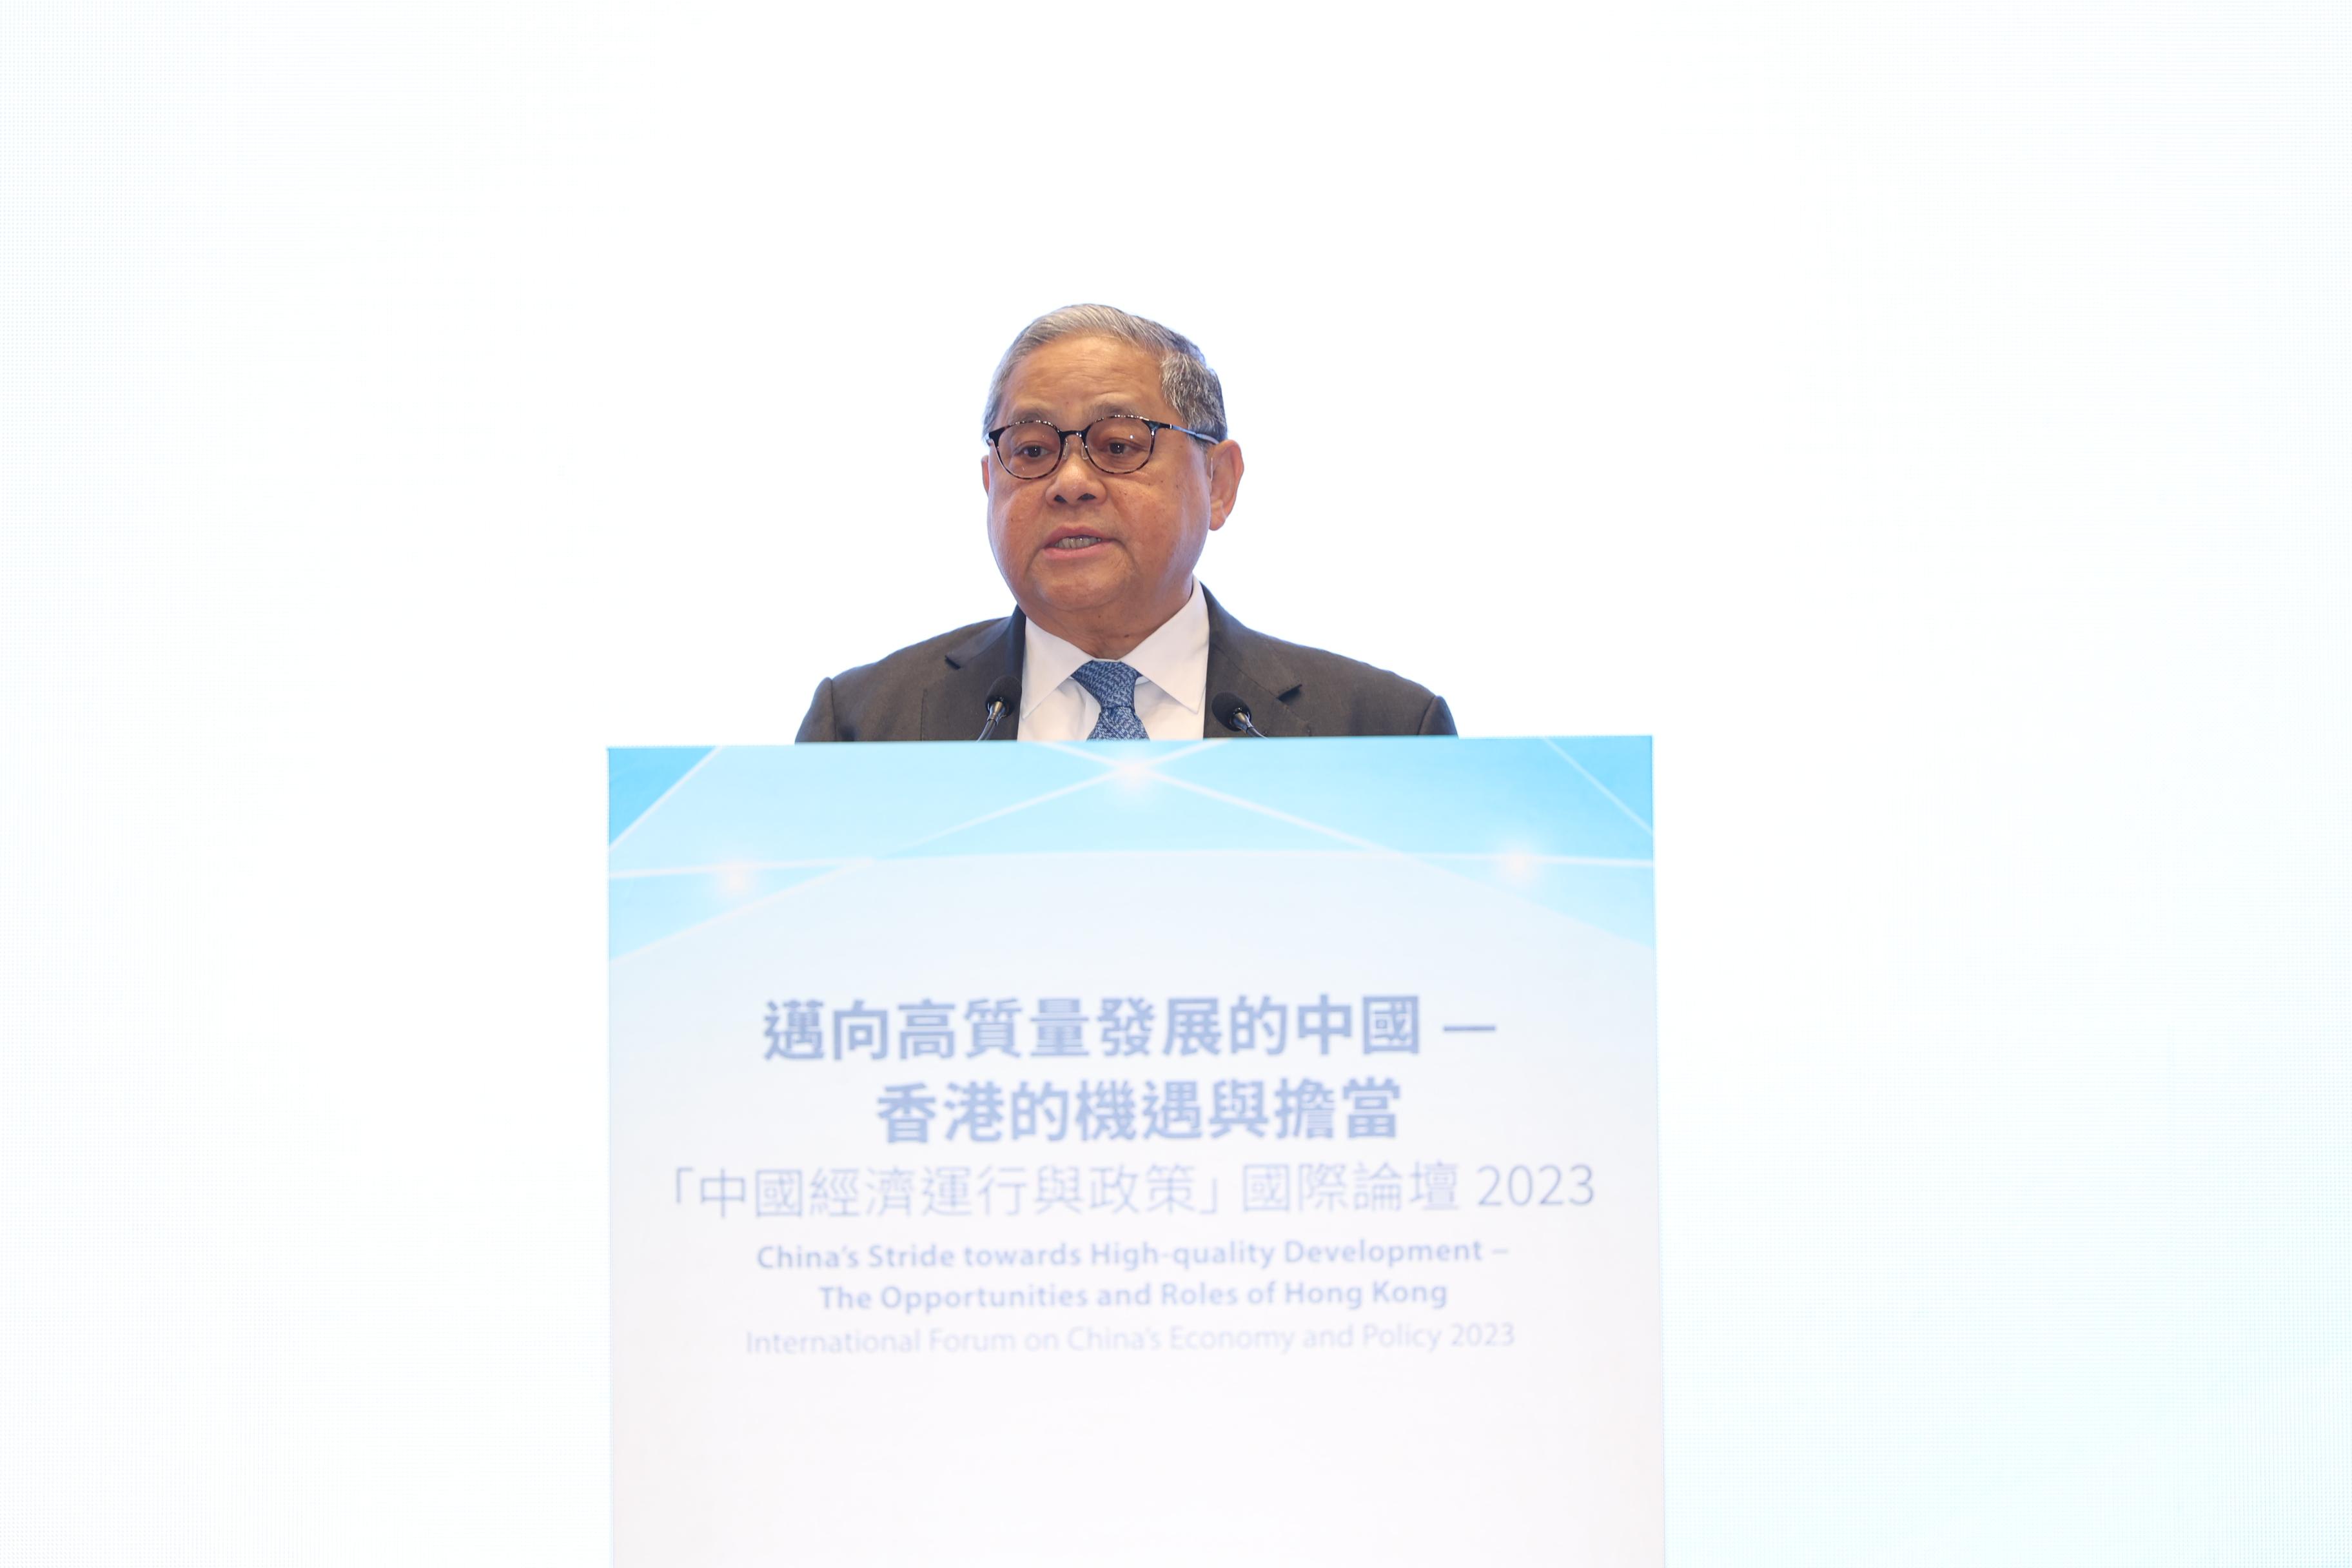 China's Stride towards High-quality Development - The Opportunities and Roles of Hong Kong International Forum on China’s Economy and Policy 2023 was held at the Central Government Offices today (November 15). Photo shows the Chairman of Fung Group, Dr Victor Fung, addressing the Forum.
